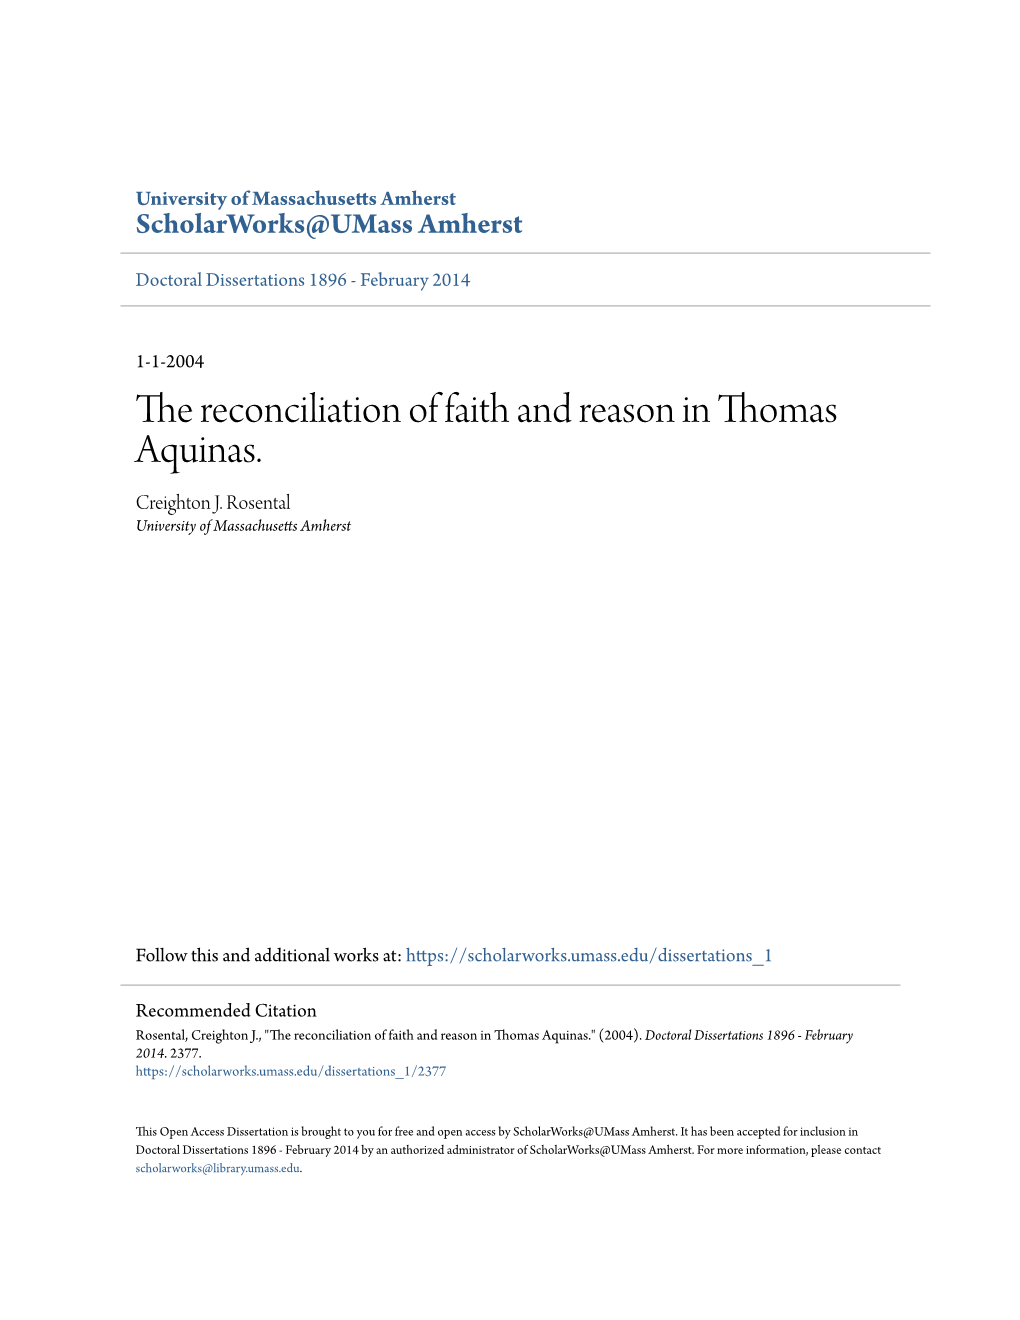 The Reconciliation of Faith and Reason in Thomas Aquinas